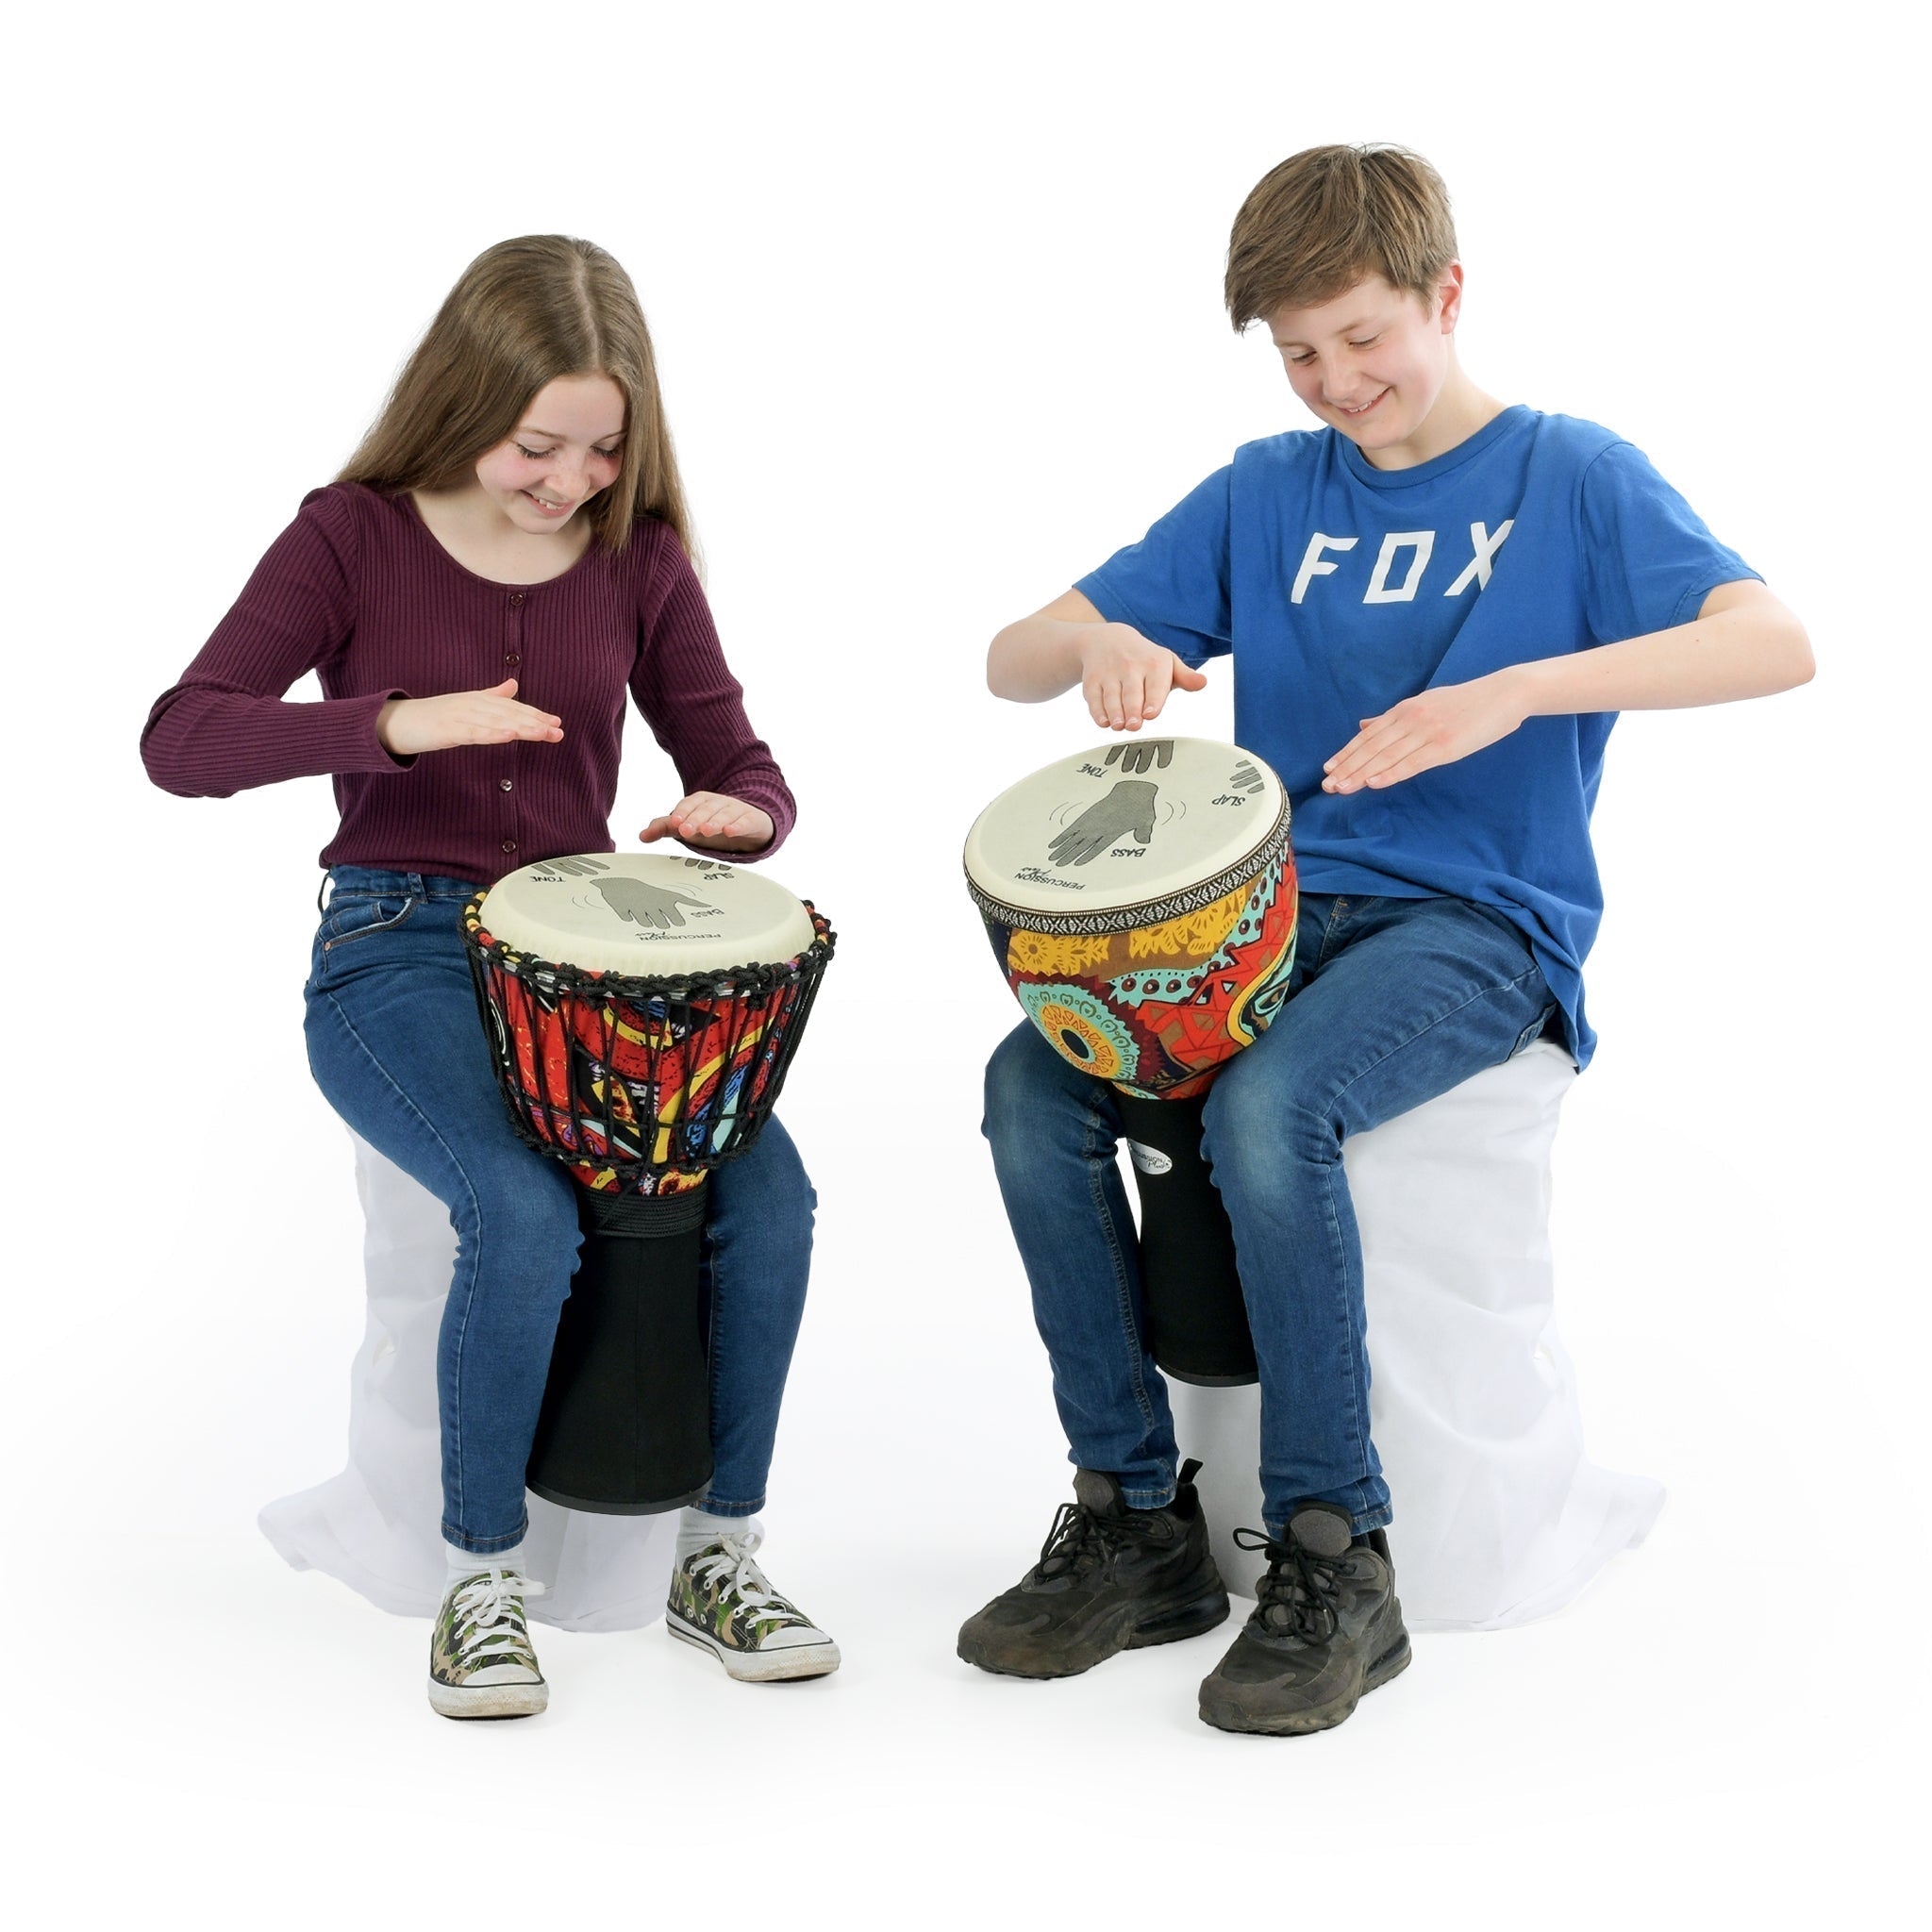 Slap djembe pack - pretuned, Djembes are becoming ever popular with classes starting up in schools, music hubs, and your local community centre. Nothing matches the joy of making music together and these classes are not only great as music education for youngsters, but also as a fun and therapeutic activity for all ages Slap Djembes come with a wealth of features making them easy to play, transport, and most importantly giving them a great sound. A great design, well-tuned drum head and durable construction